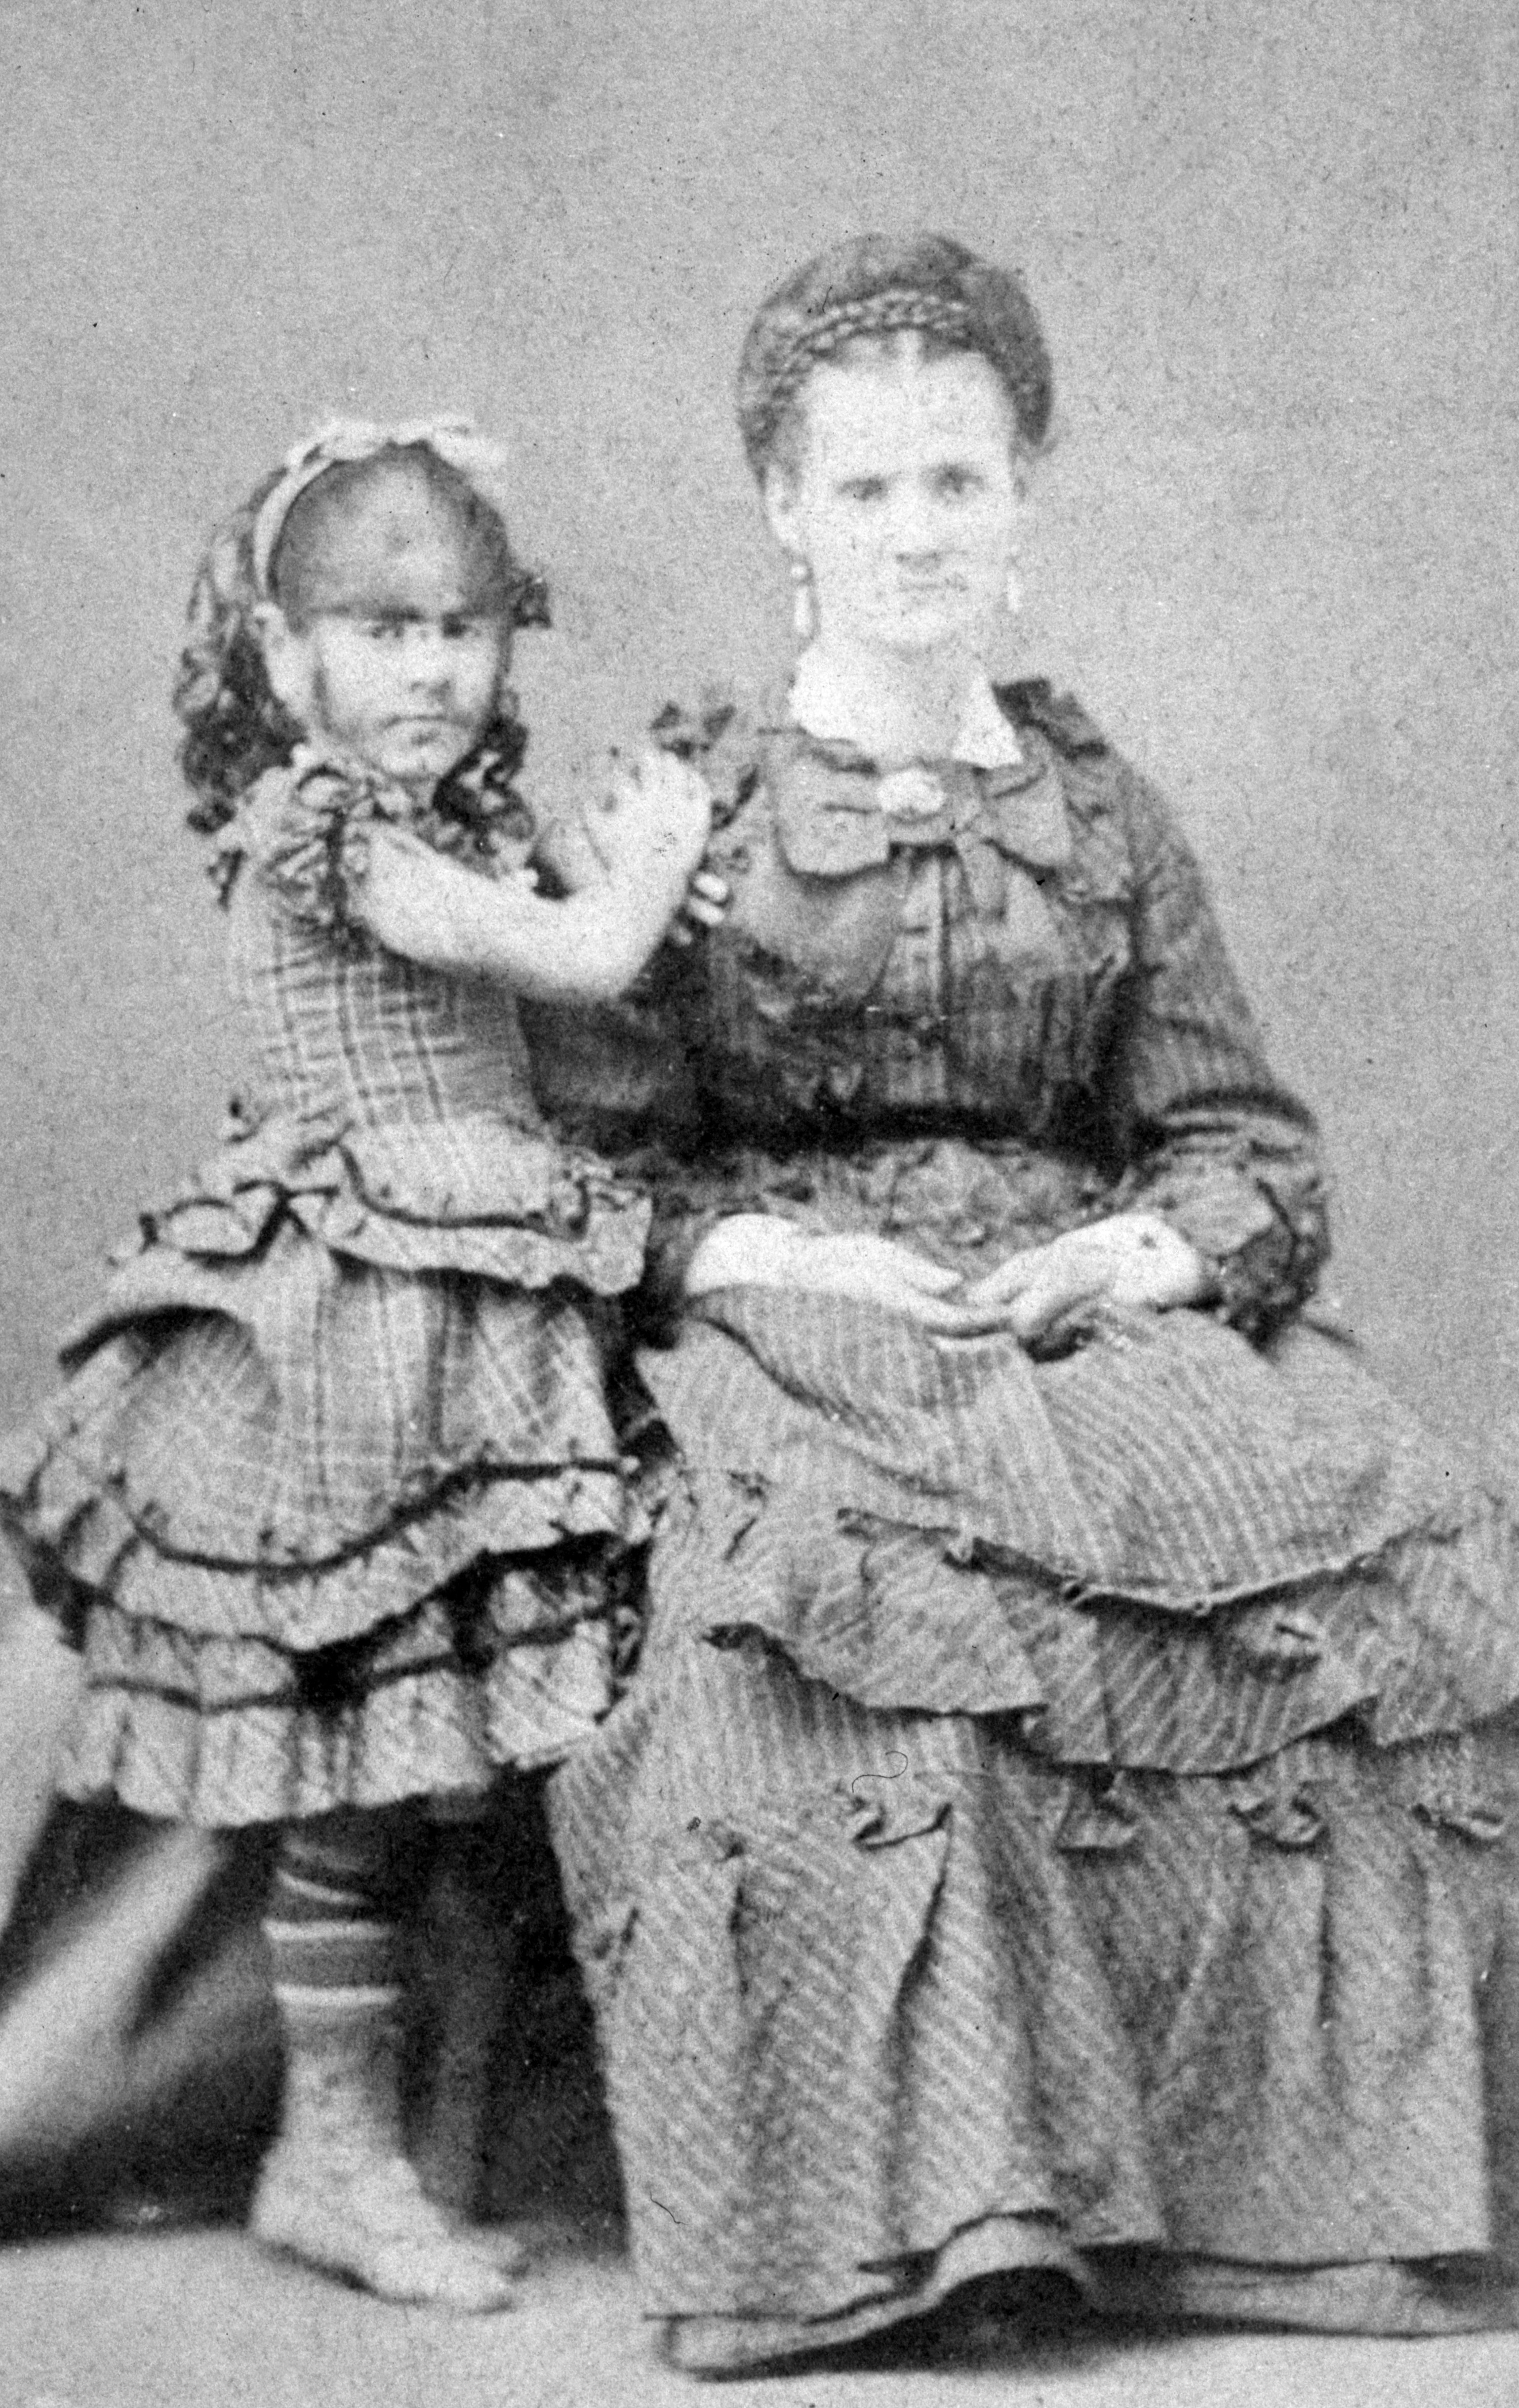 Portrait of Annie Jones, the Bearded Girl (1865–1902), standing with her mother in the 1870s